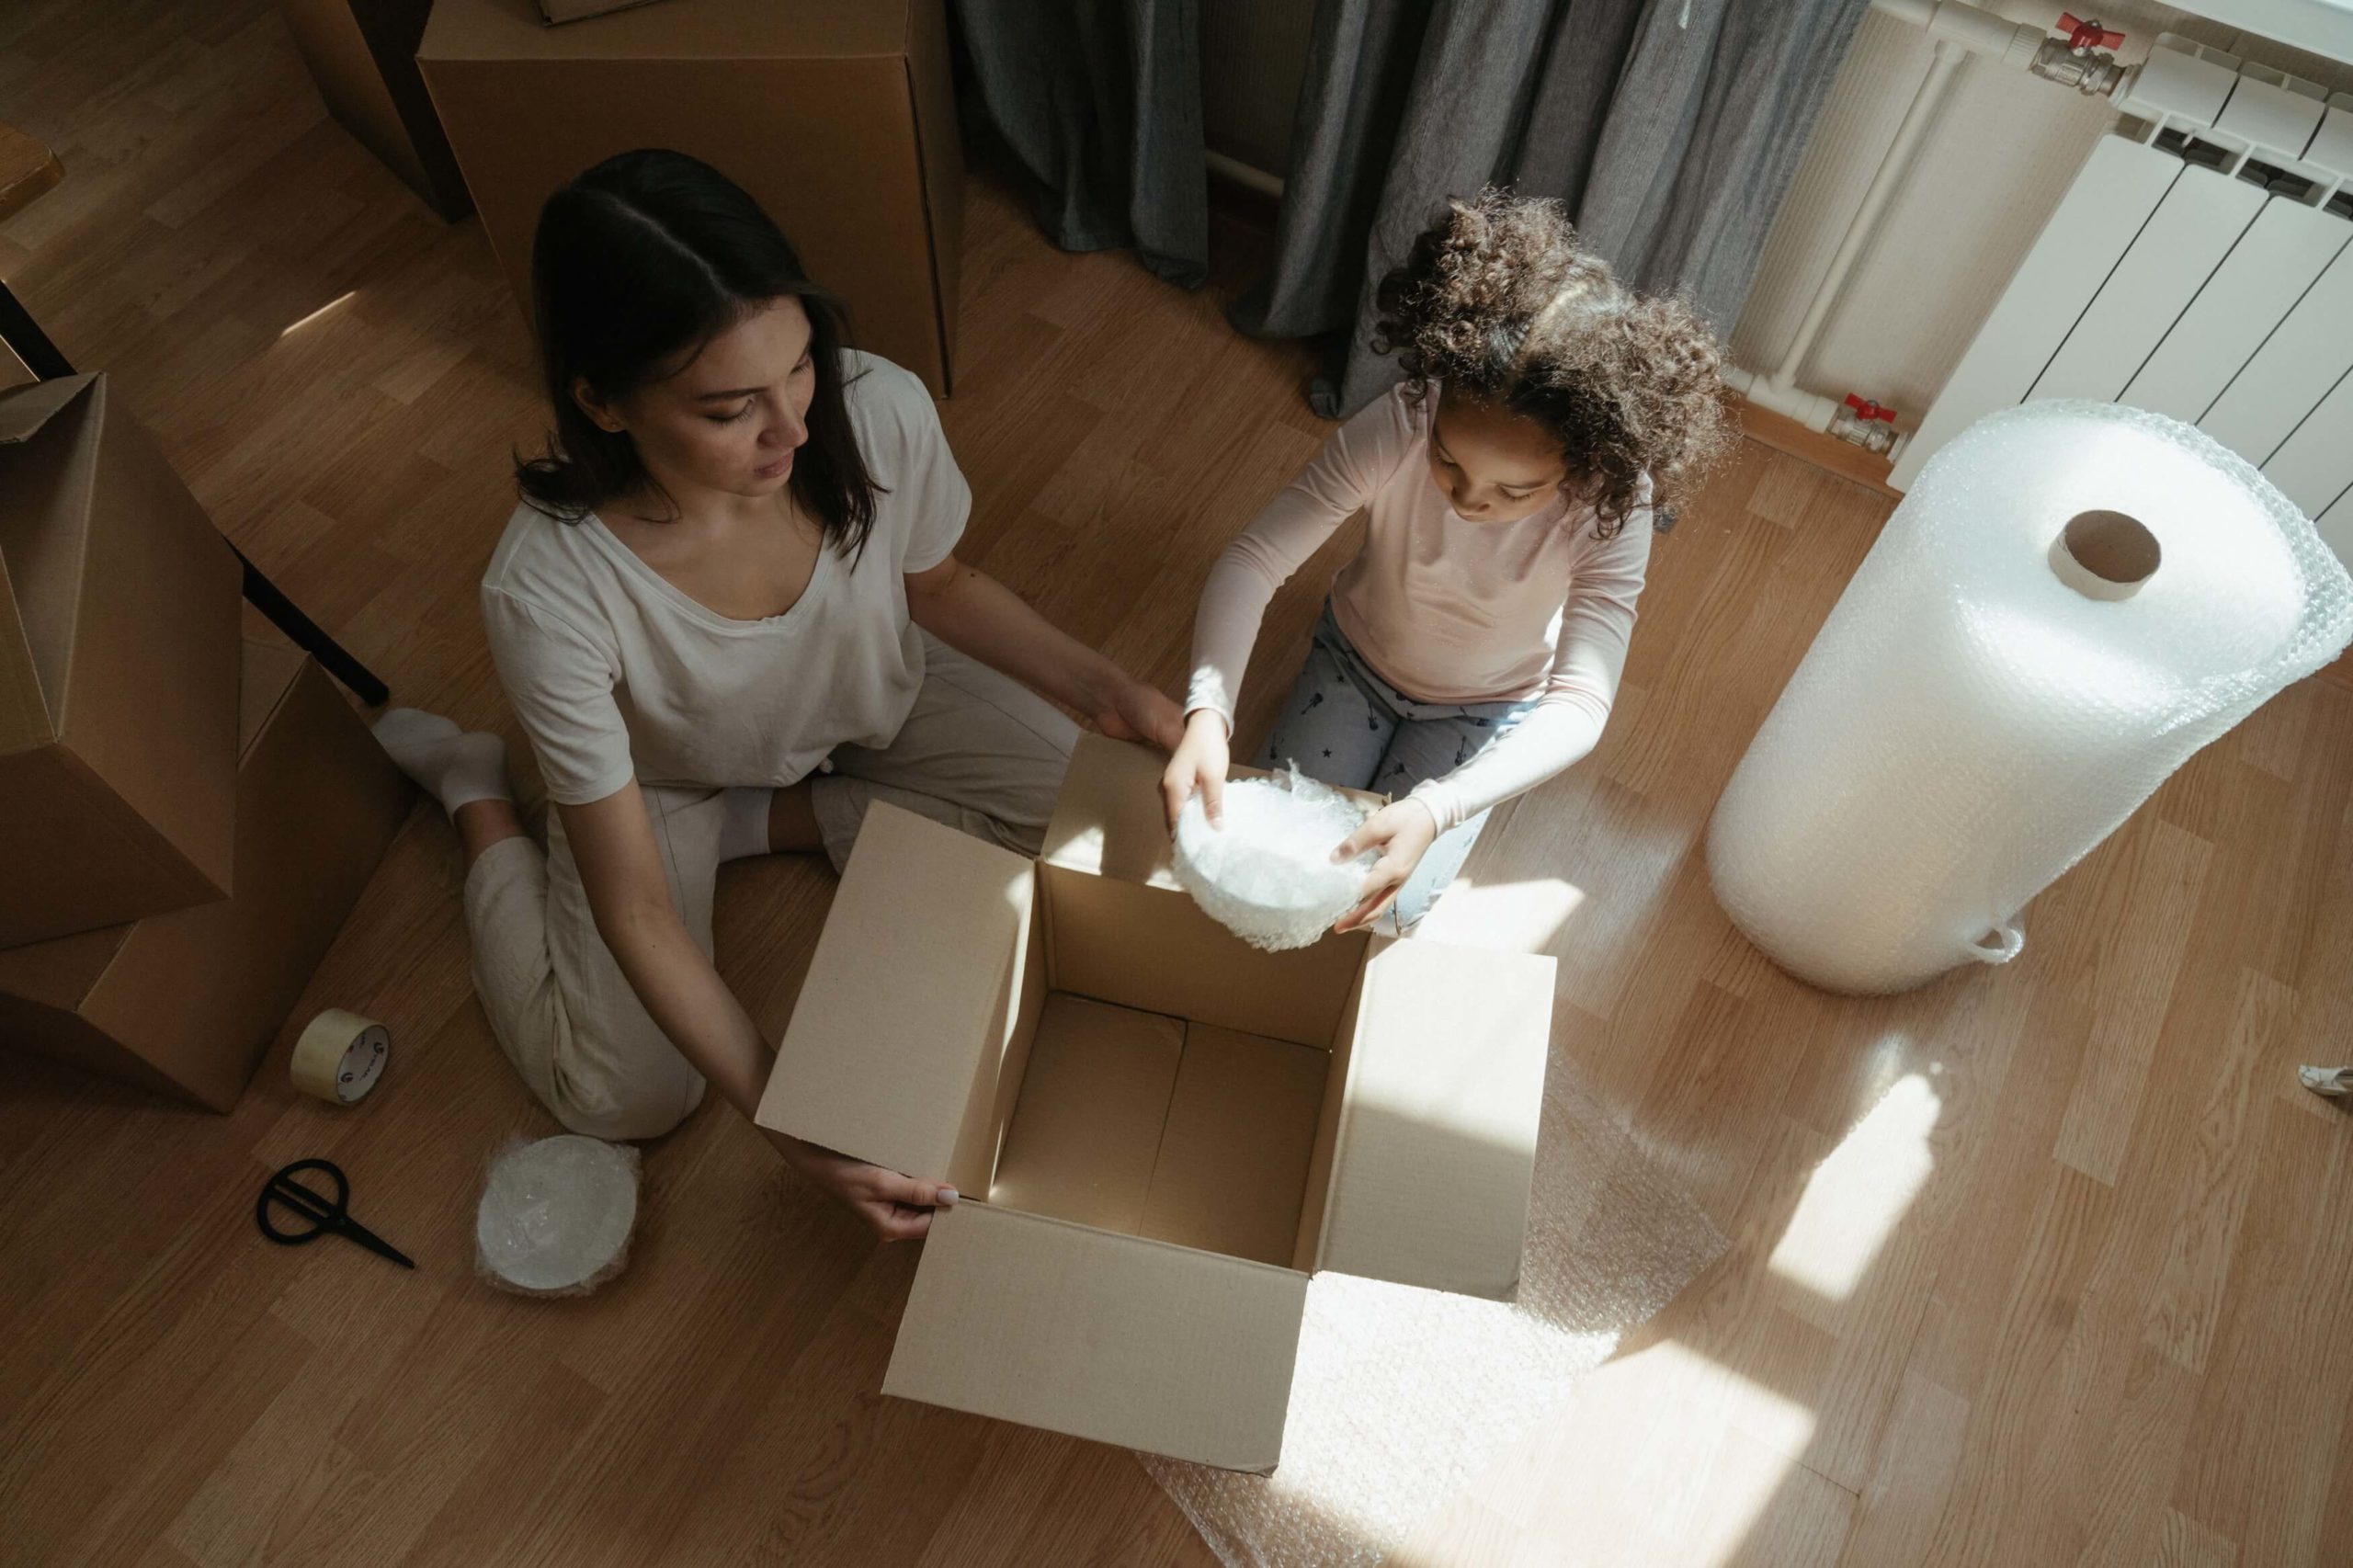 4 Moving Tips to Set Up a Second Home in Dubai